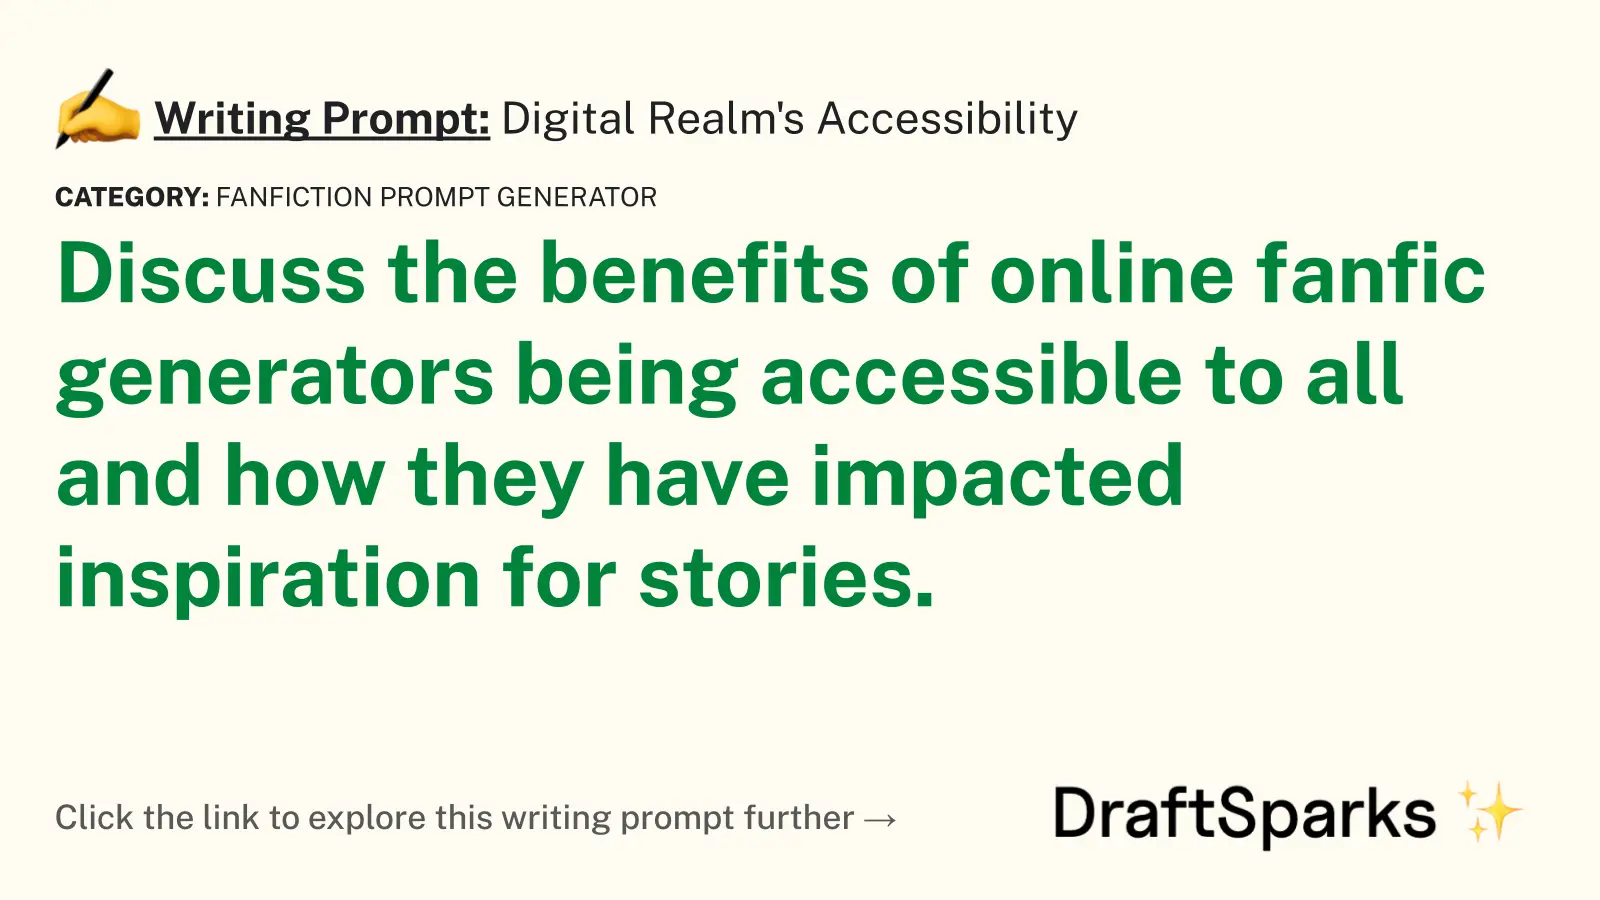 Digital Realm’s Accessibility